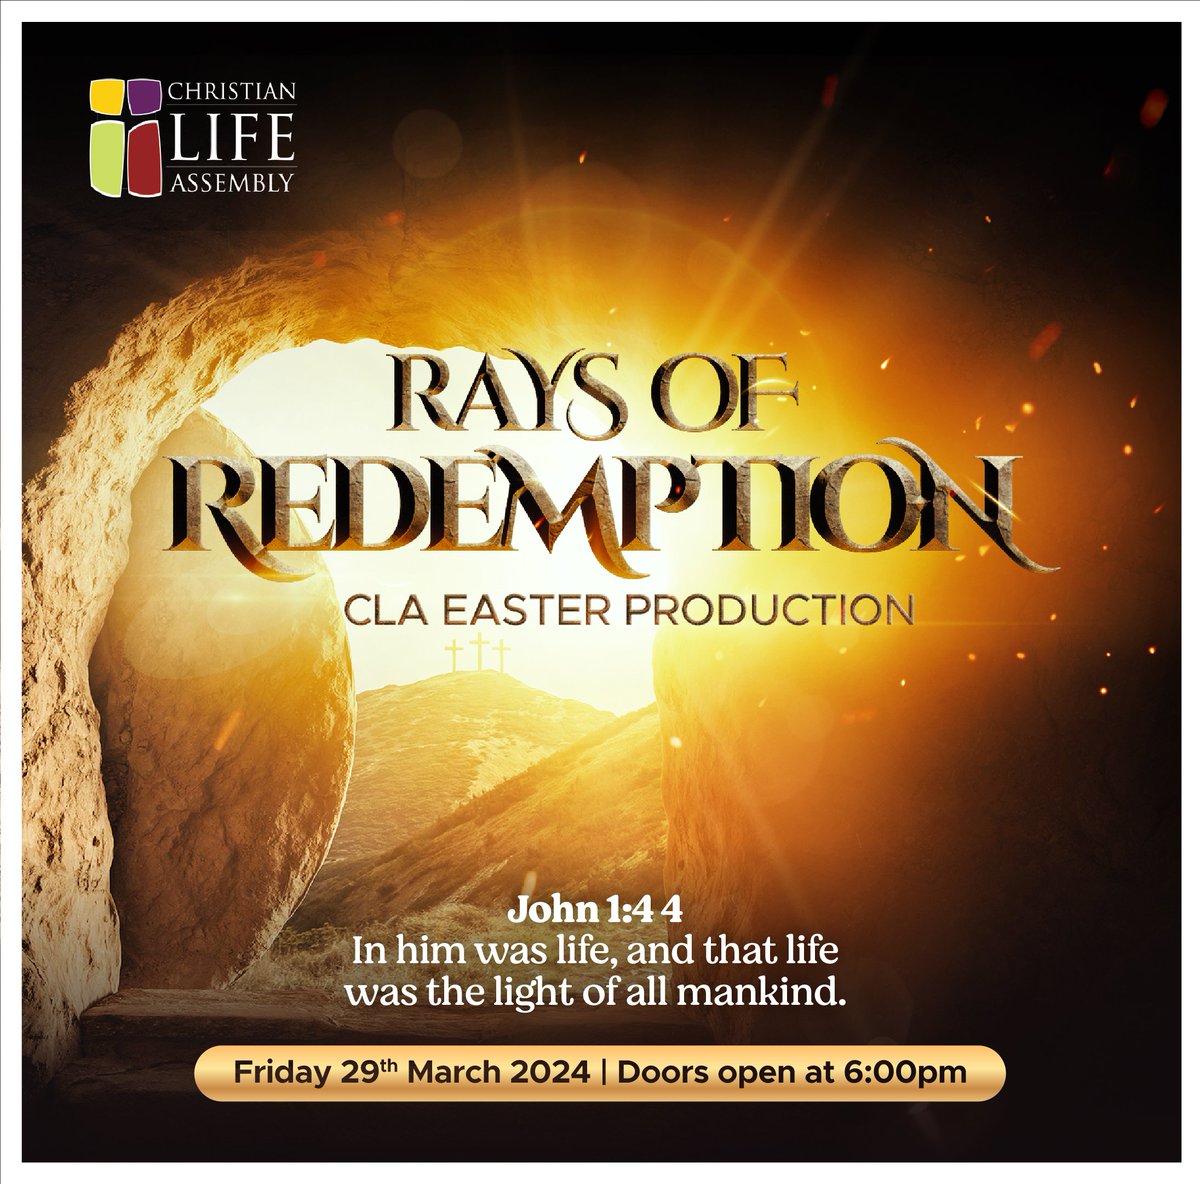 Get ready for an Easter Production that will turn your world right side up! Join us this Good Friday at CLA Rwanda for an unforgettable show like you've never seen before. Remember, it's ONE SHOW only - don't miss out! #Easter2024 #raysofredemption #clarwanda #GoodFriday